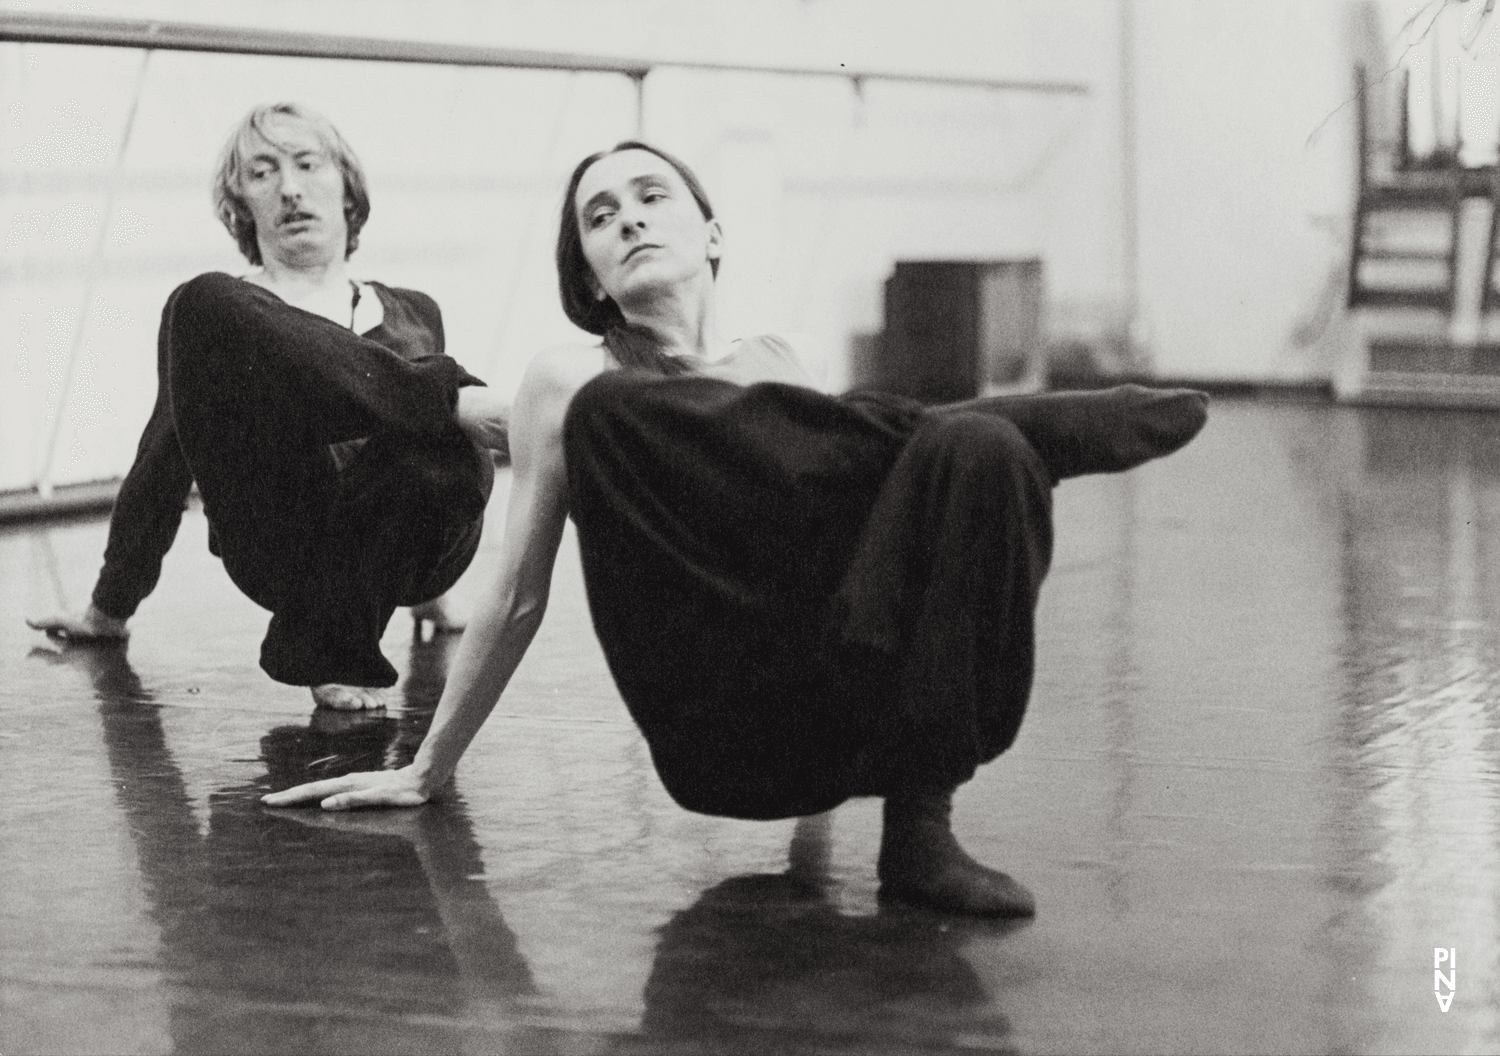 Pina Bausch and Dominique Mercy in “Café Müller” by Pina Bausch